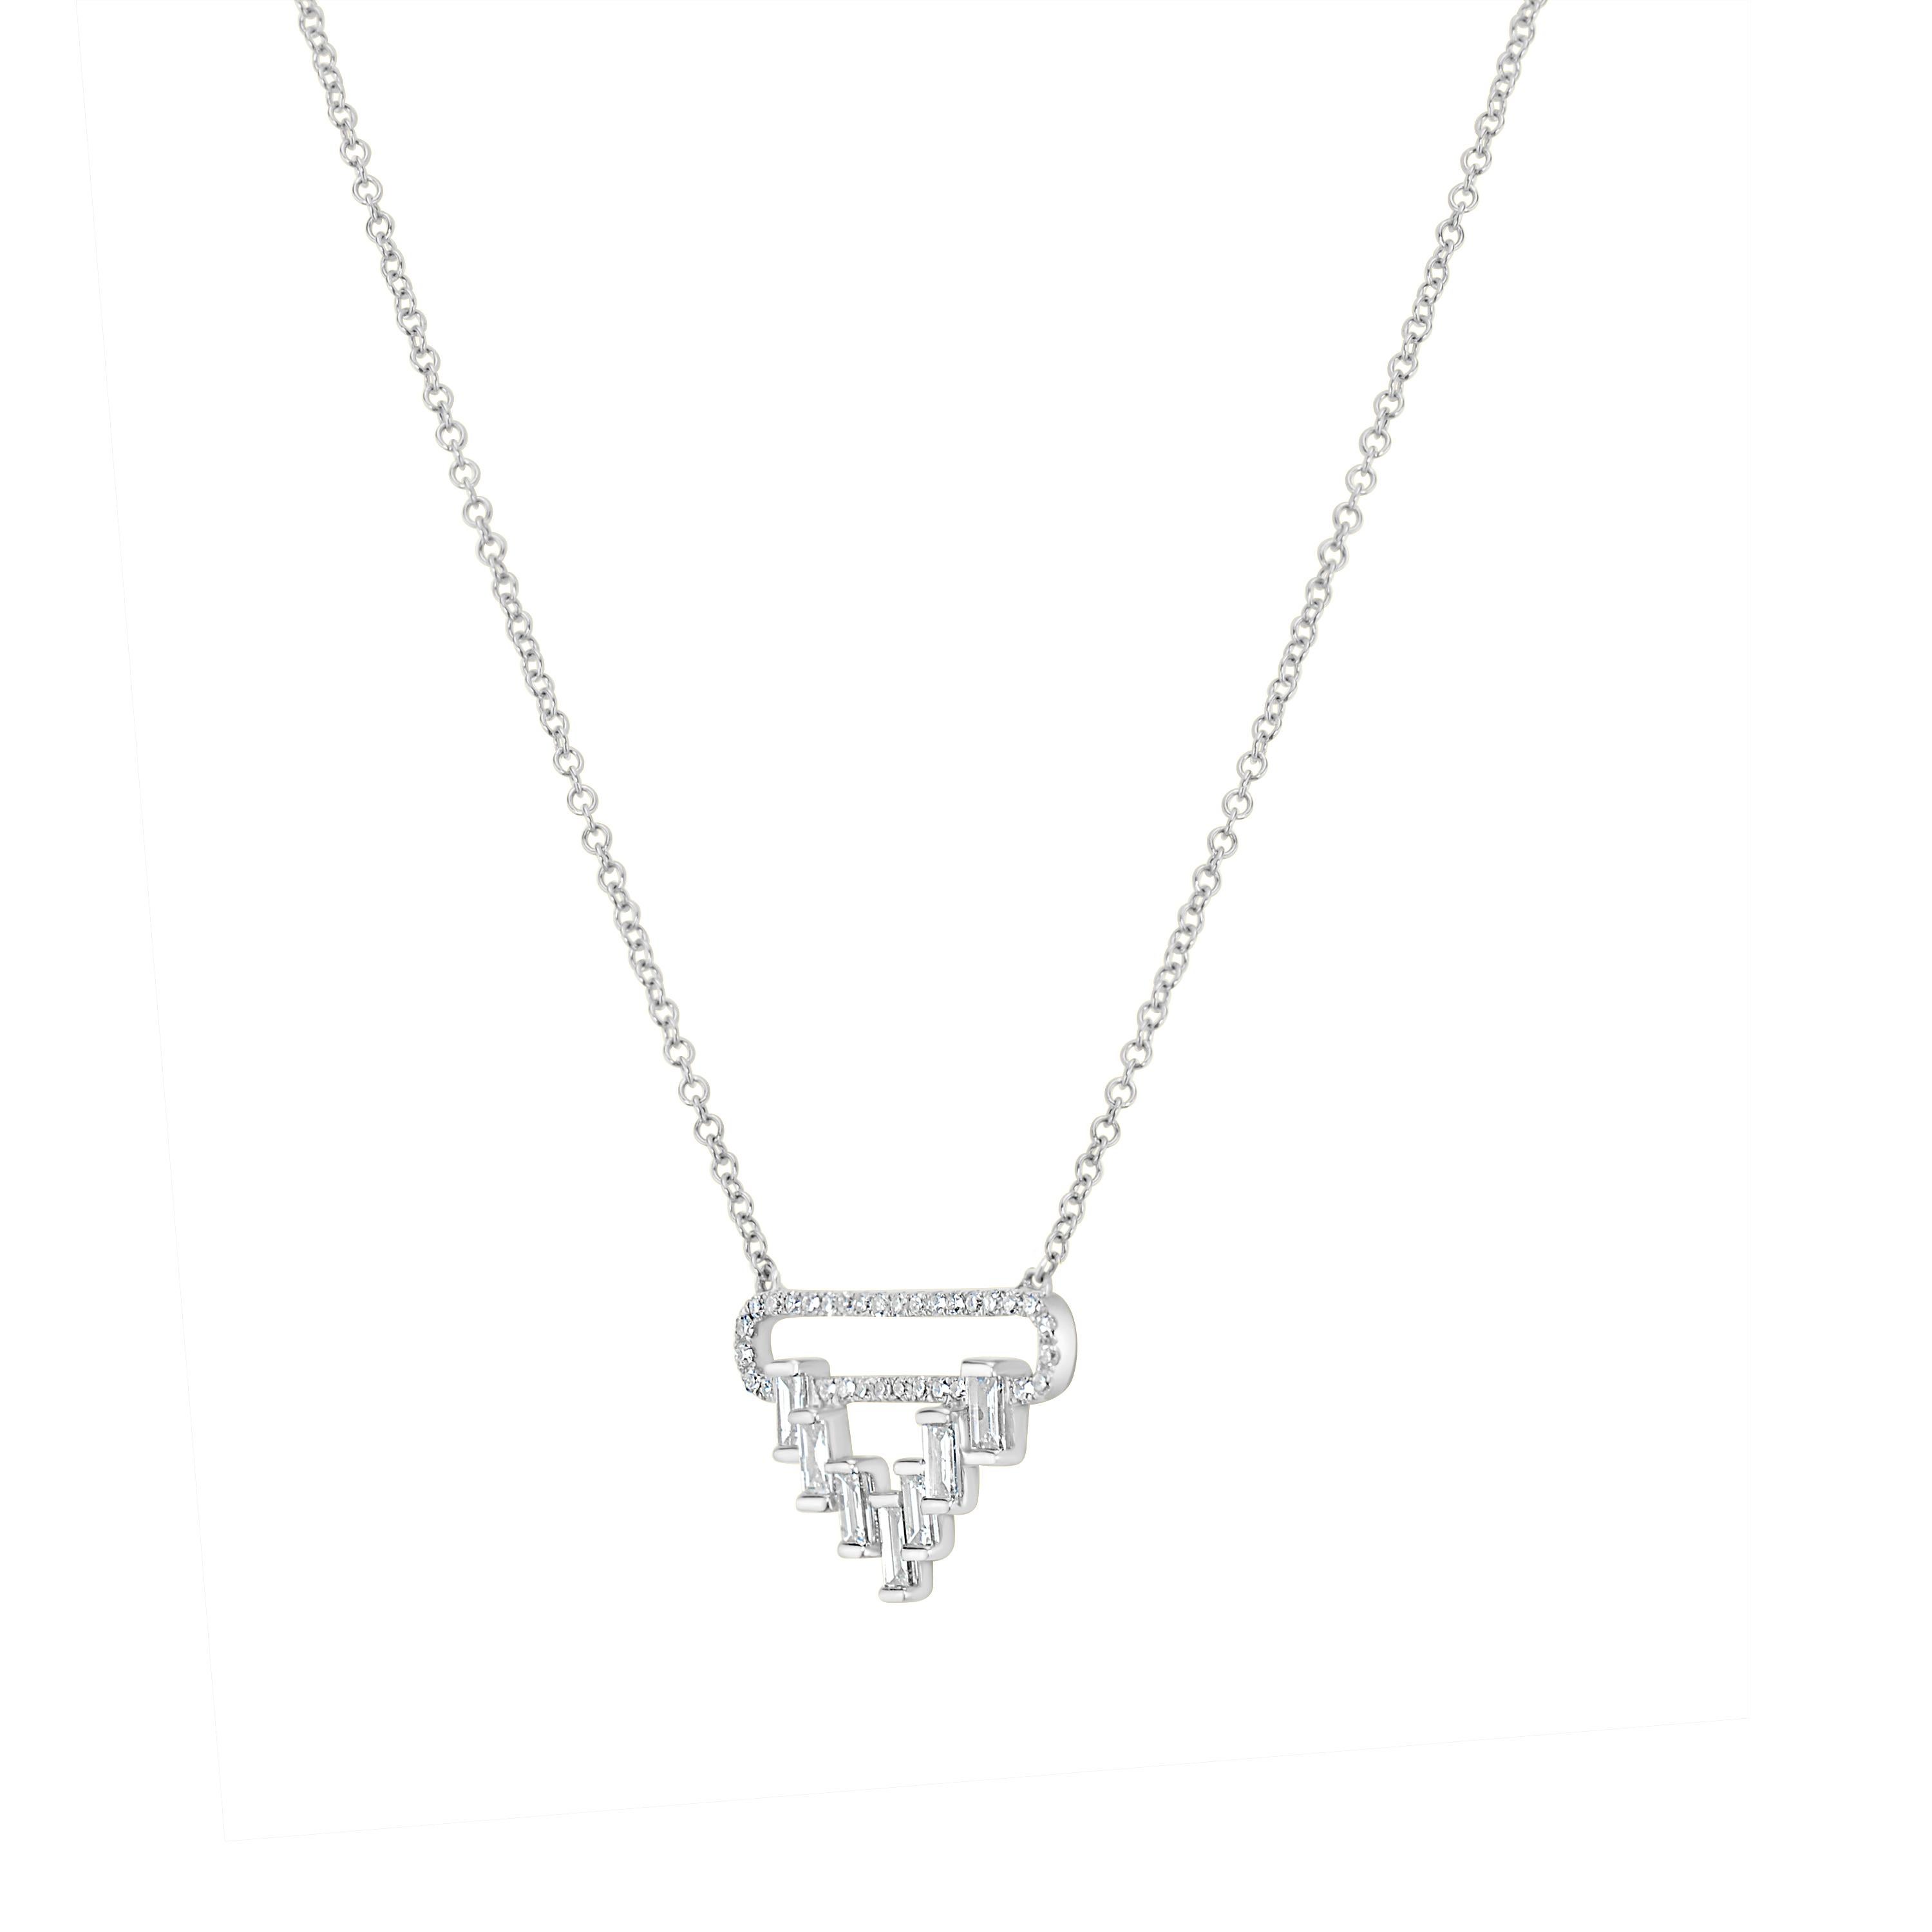 This elegant 15 inch Round and Baguette Diamond Pendant Necklace rendered in gleaming 14K white gold compliments your neckline . Embellished with 32 round diamonds and 7 baguette diamonds totaling 0.41Ct arranged in an open space triangular motif